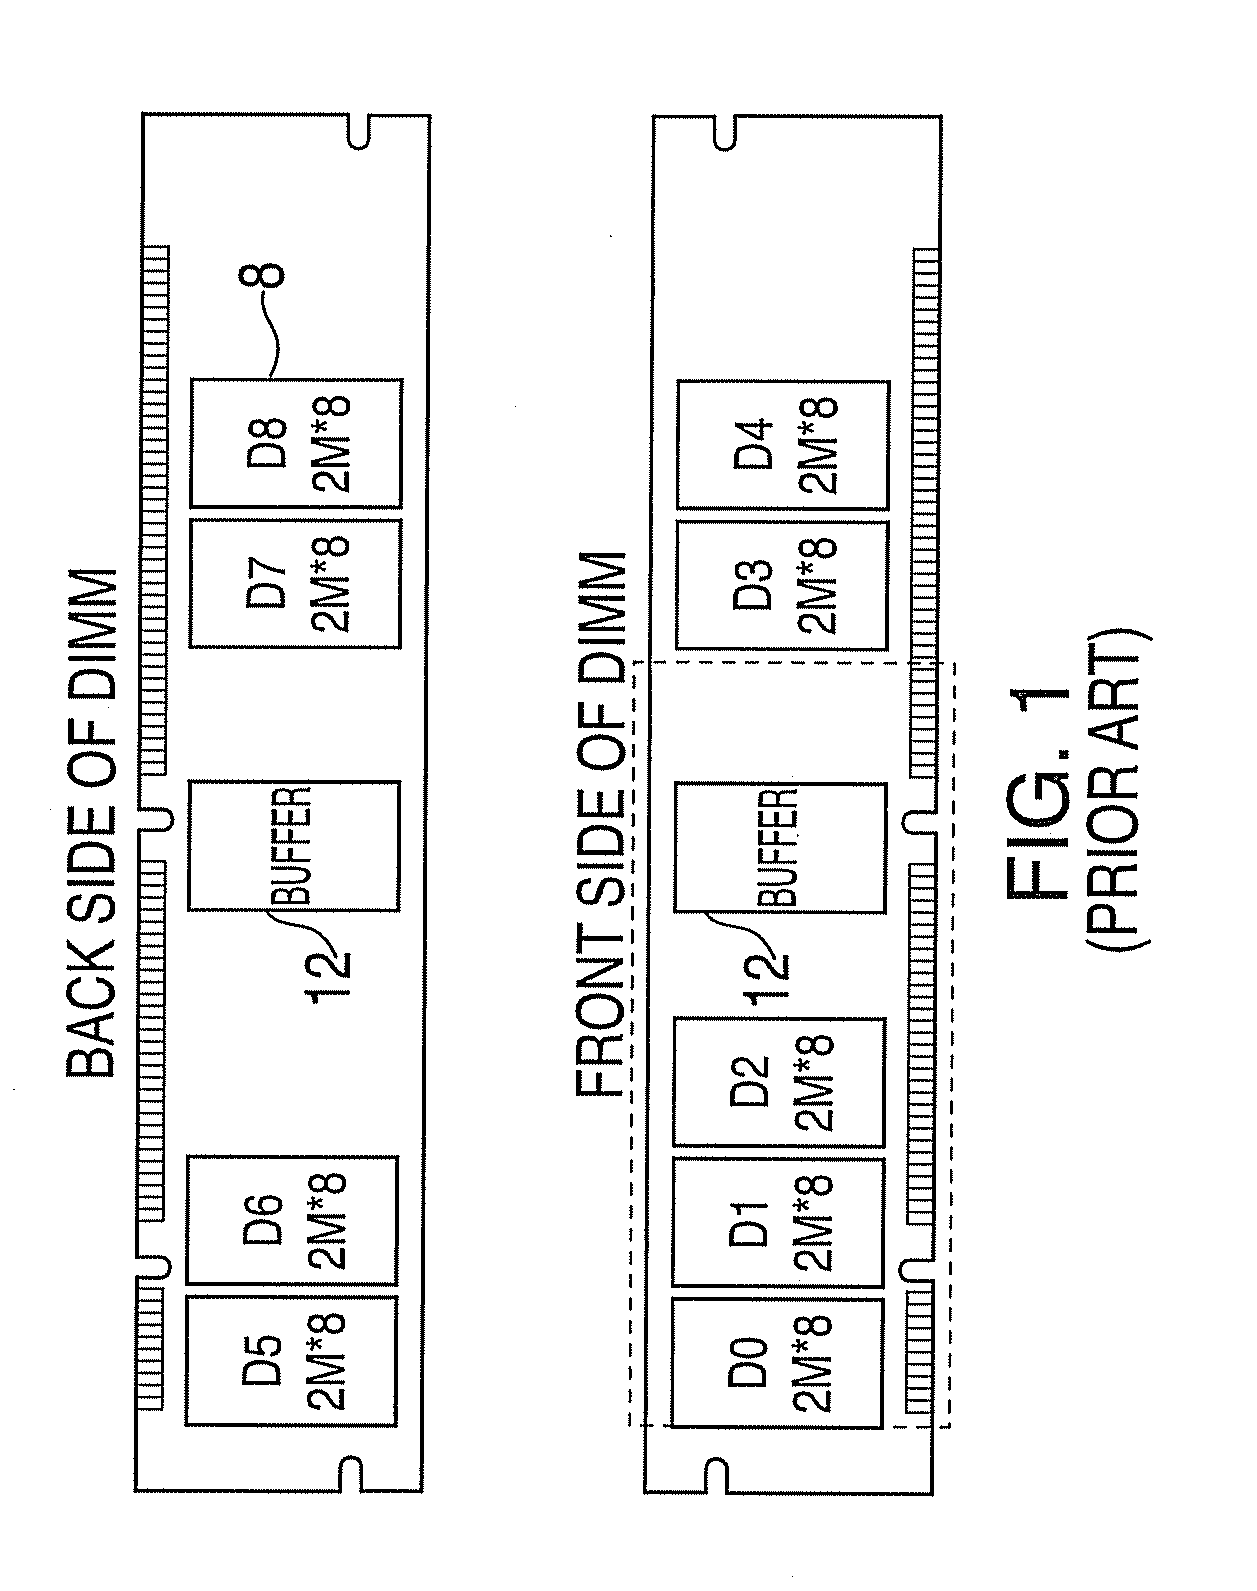 Systems and methods for providing performance monitoring in a memory system